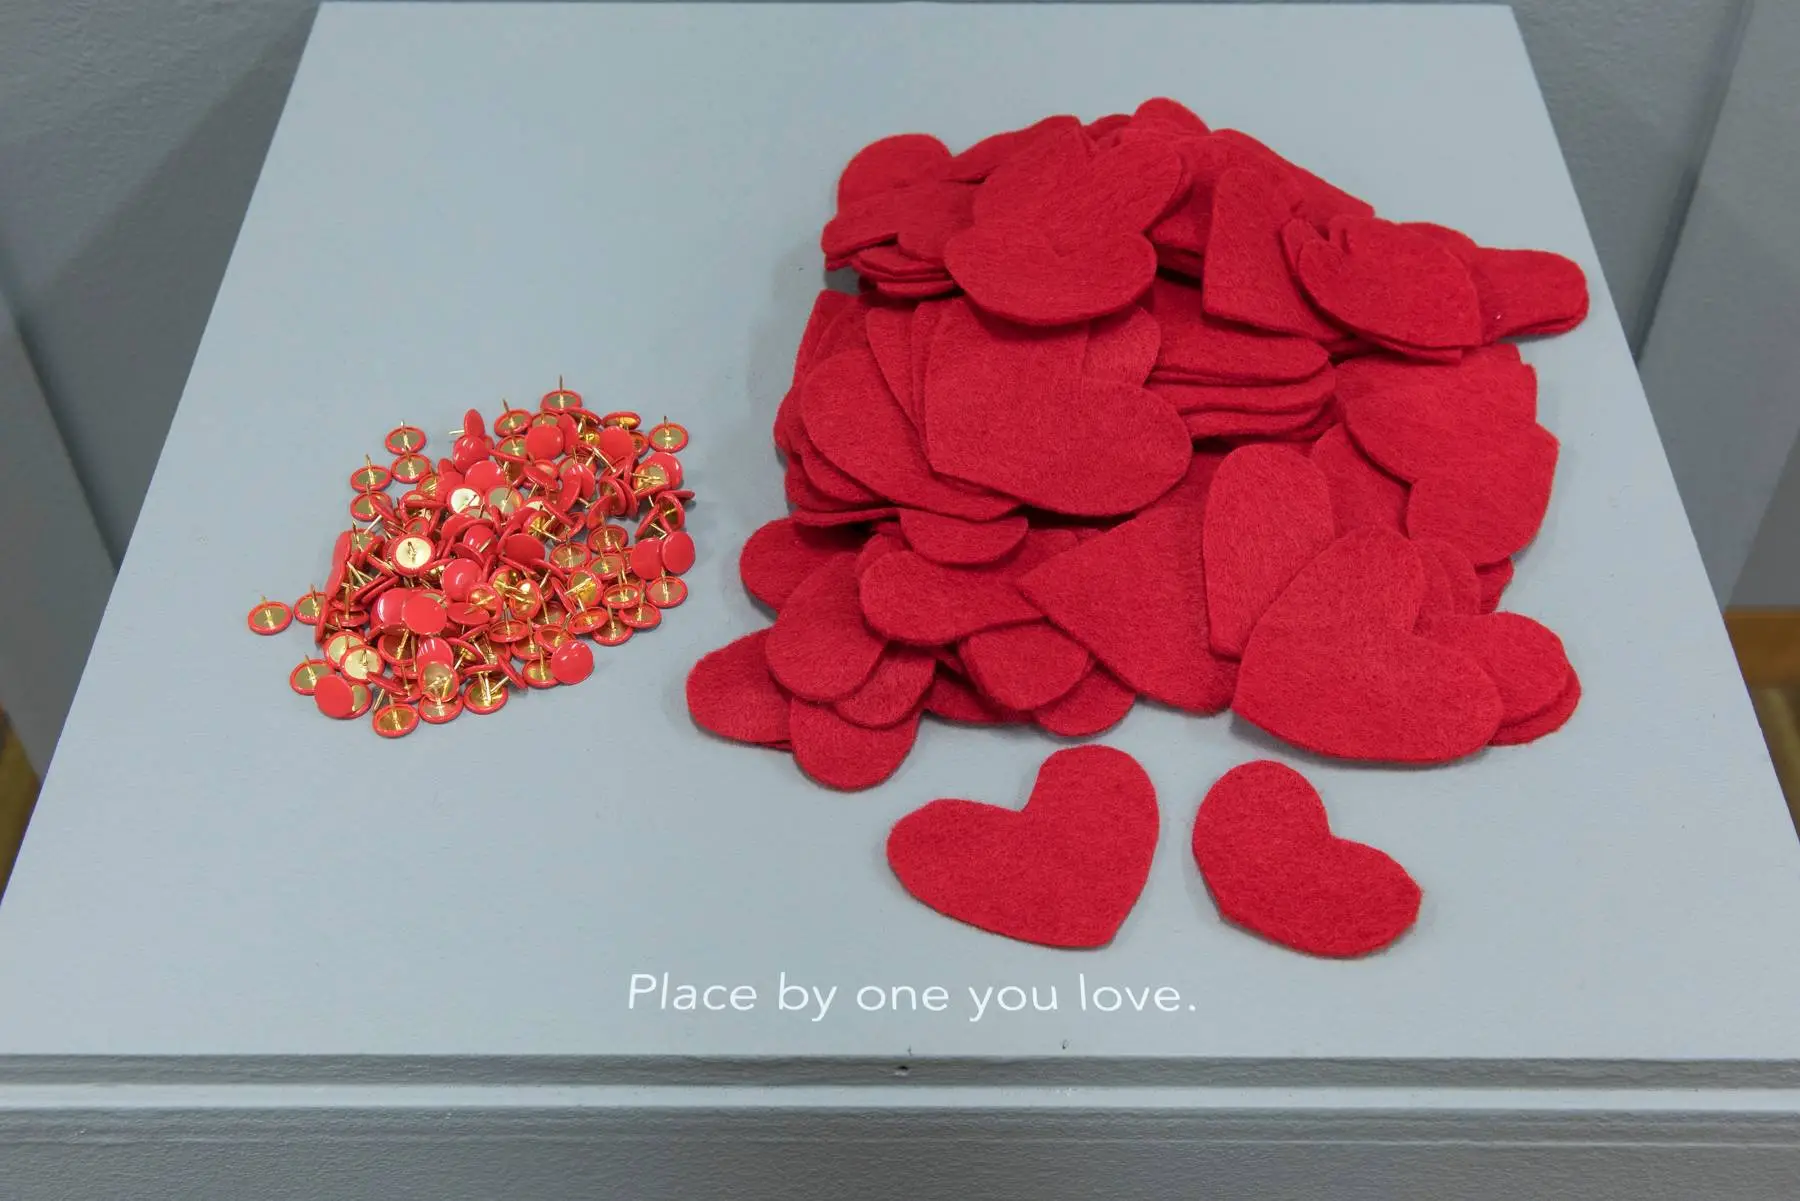 red felt hearts and pins on a pedestal labelled "place by one you love"